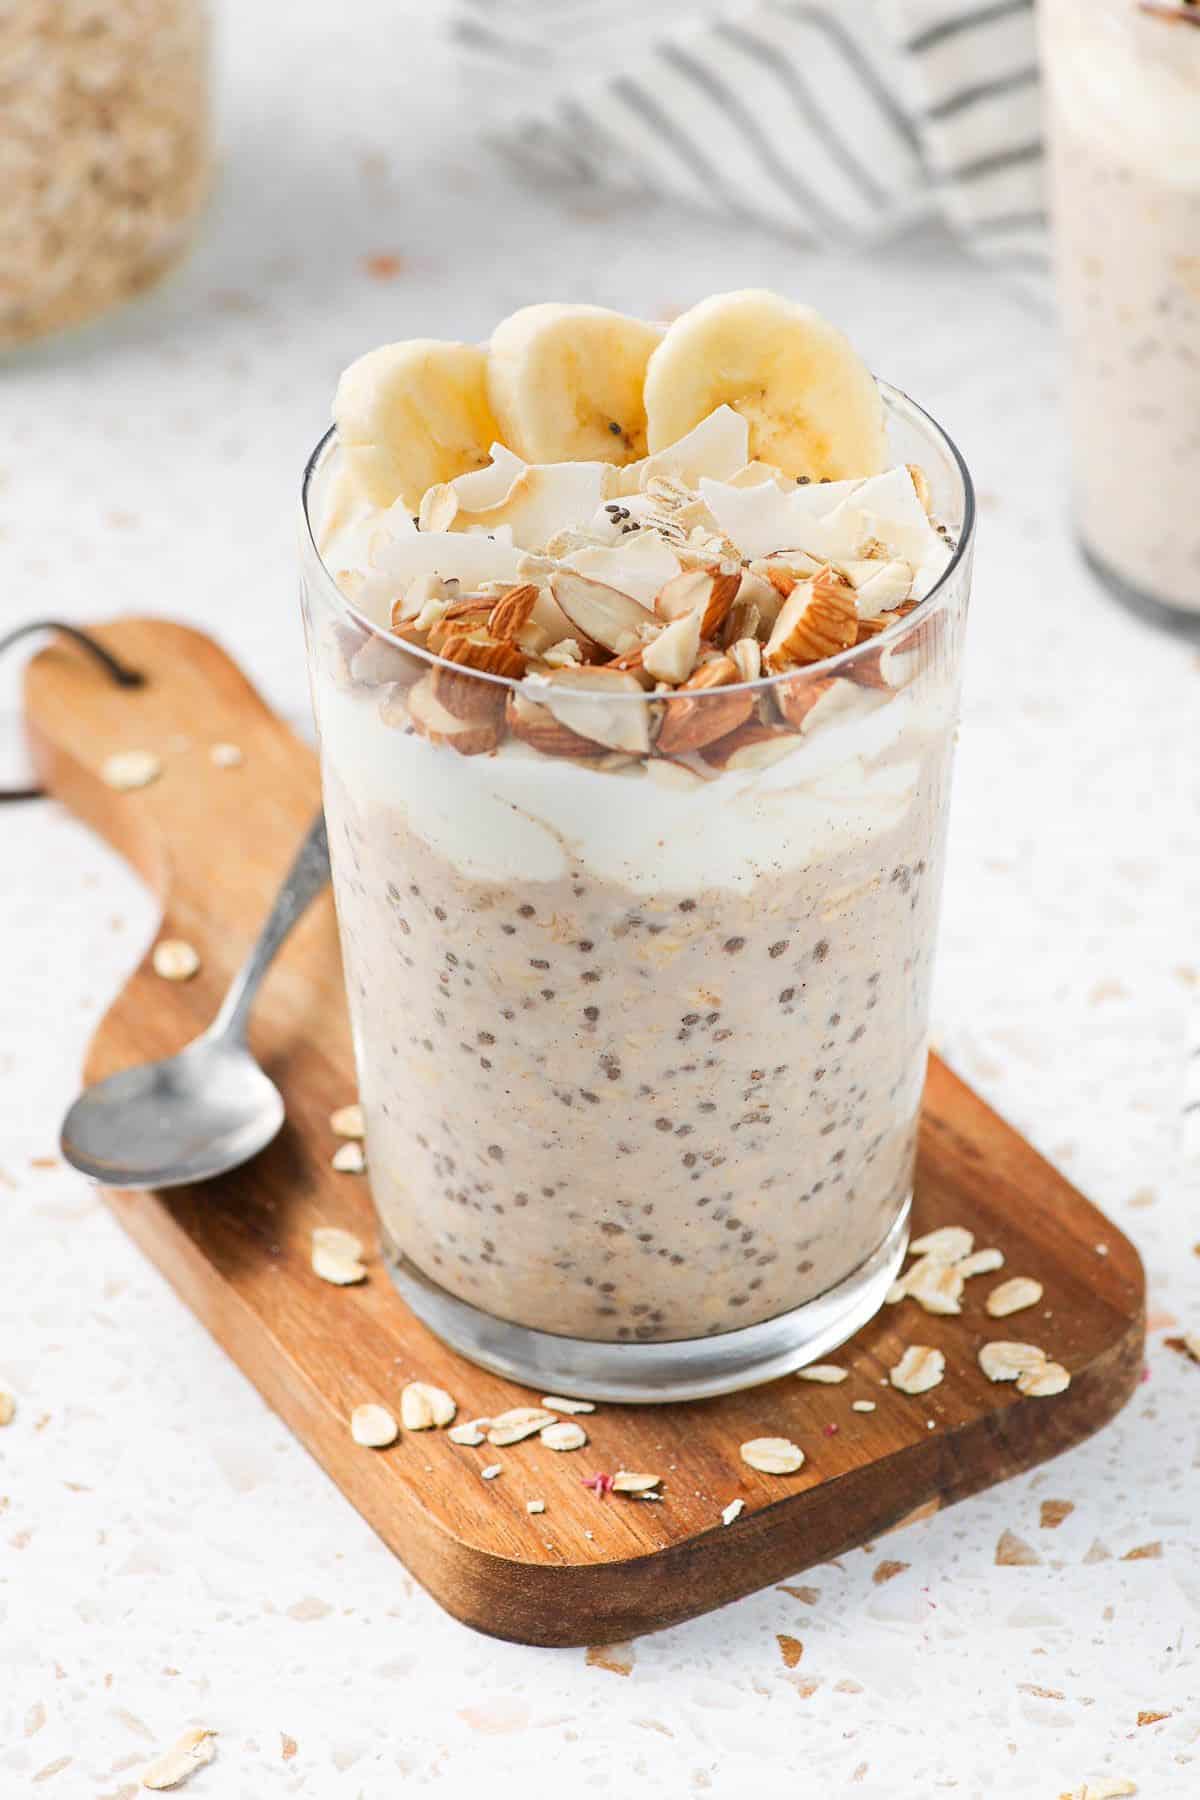 Glass jar of overnight oats, sitting on a wooden board, with a spoon on the edge.